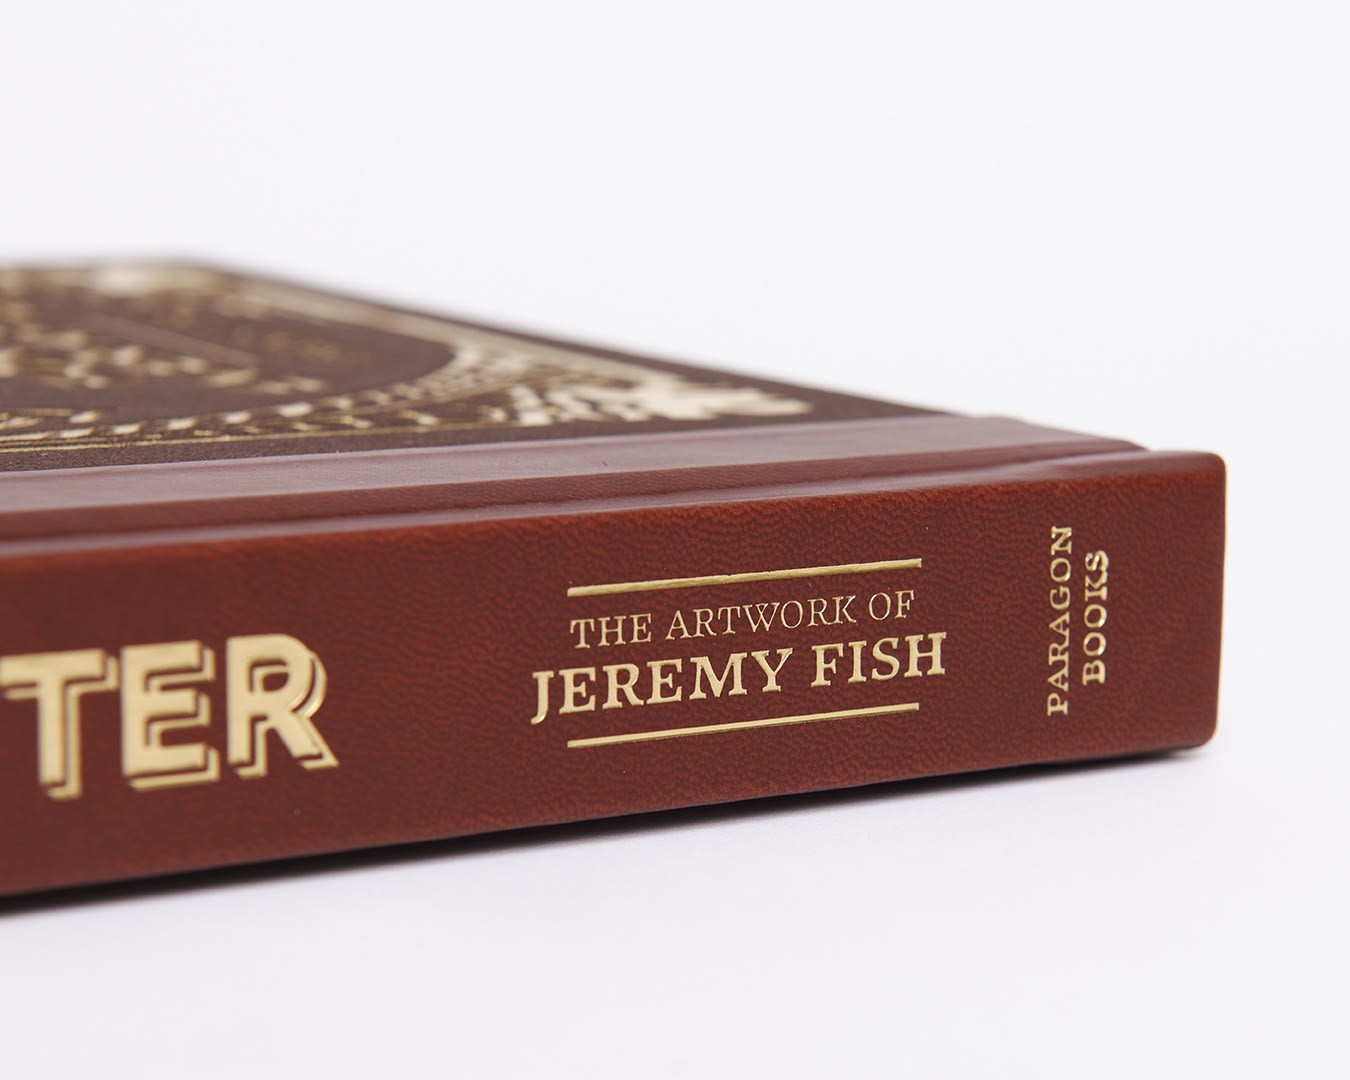 photograph of Jeremy Fish monograph spine.